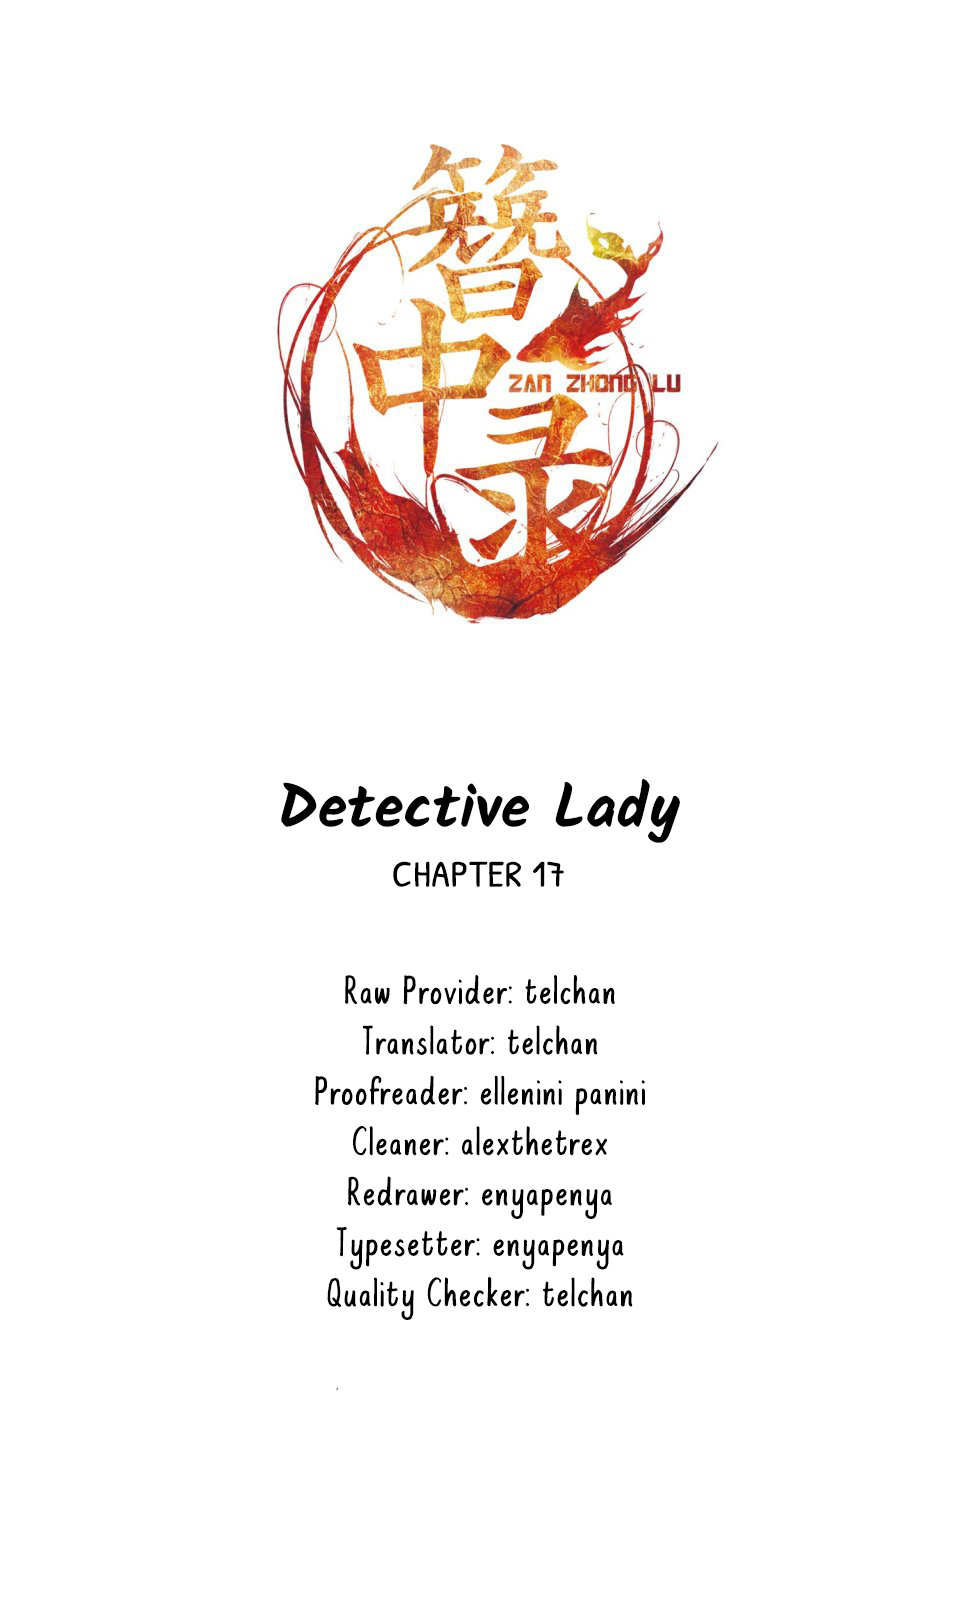 Detective Lady Ch. 17